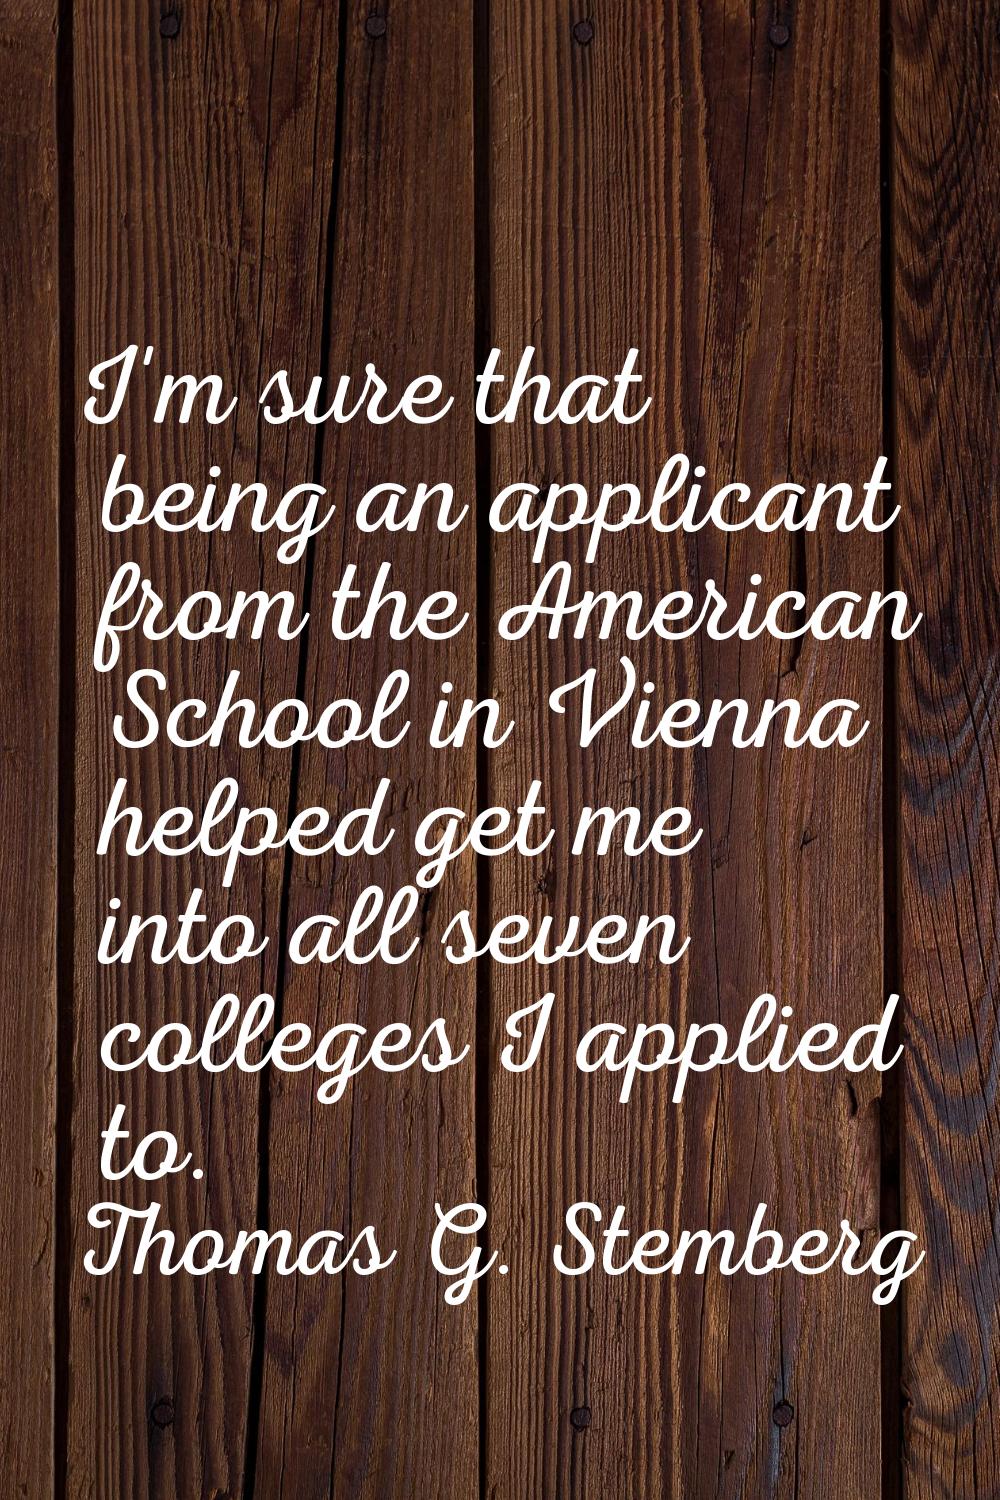 I'm sure that being an applicant from the American School in Vienna helped get me into all seven co